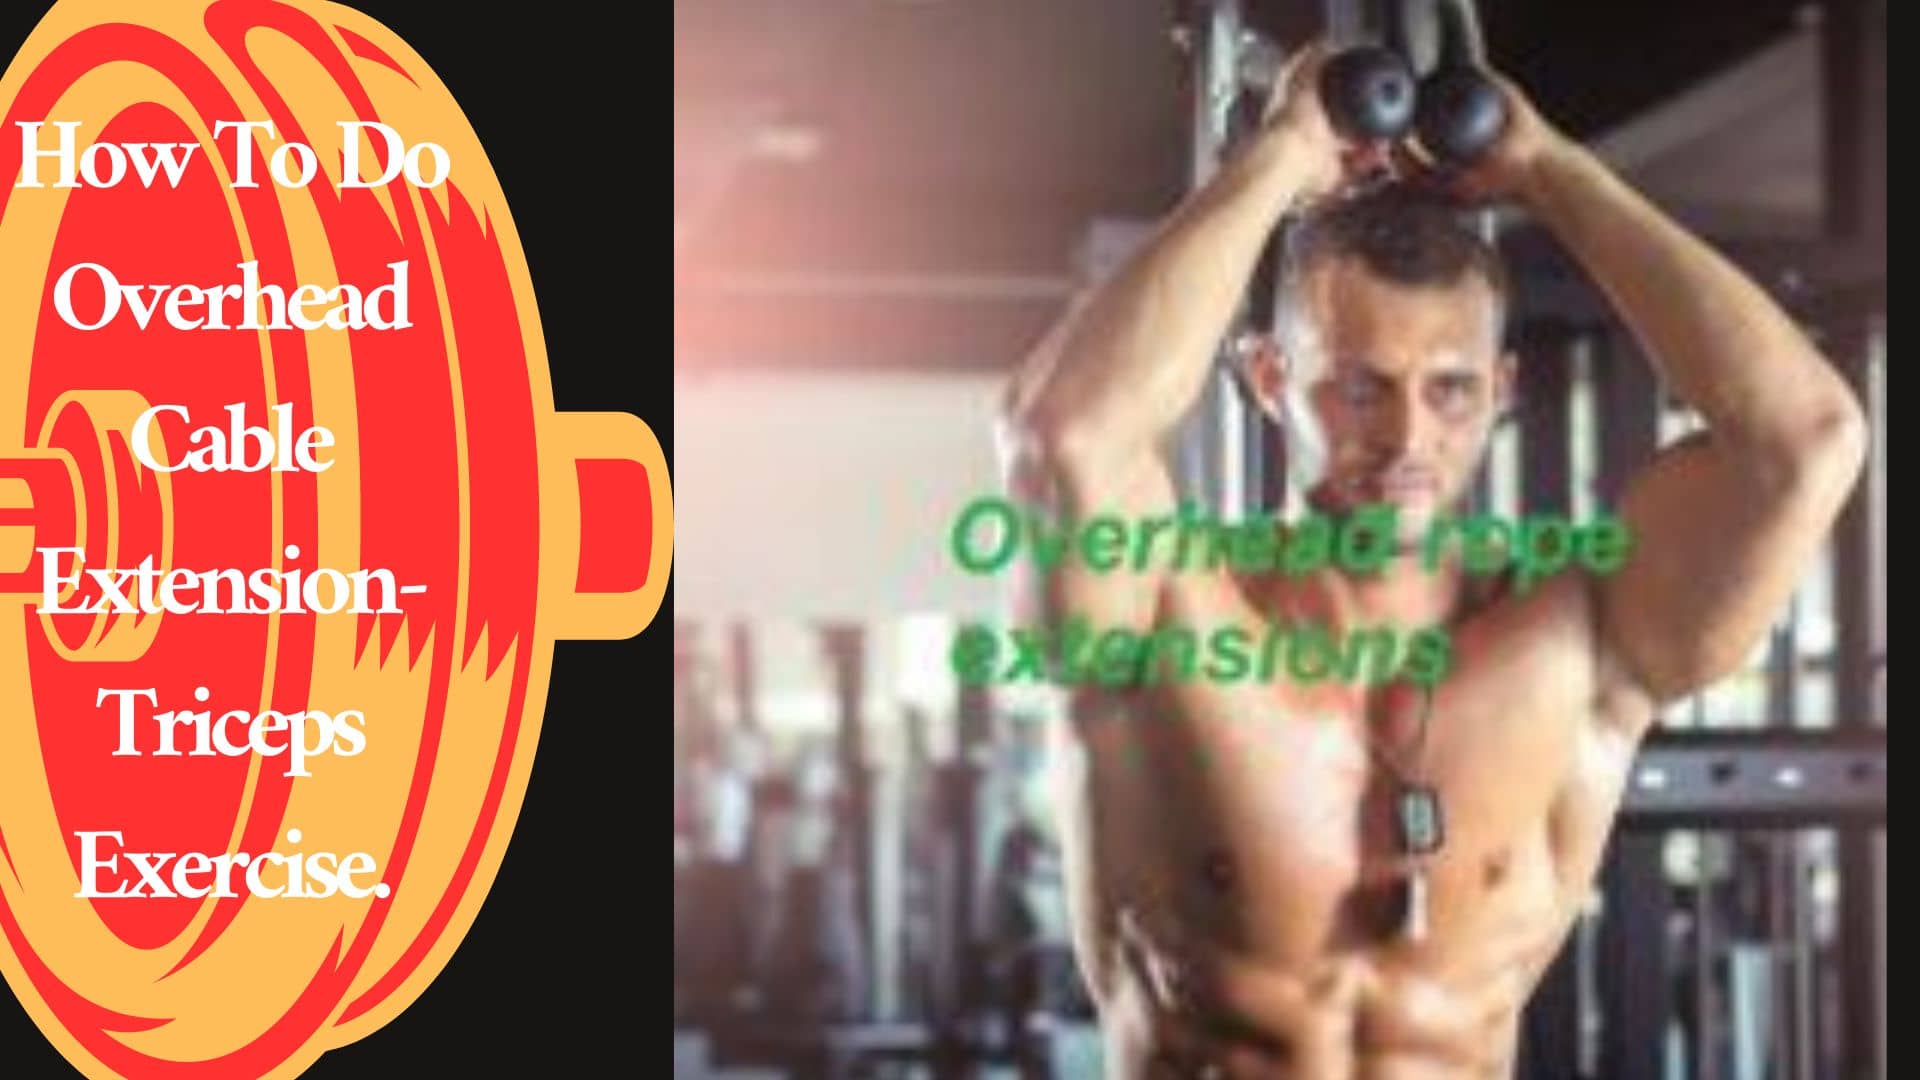 How To Do Overhead Cable Extension-Triceps Exercise.